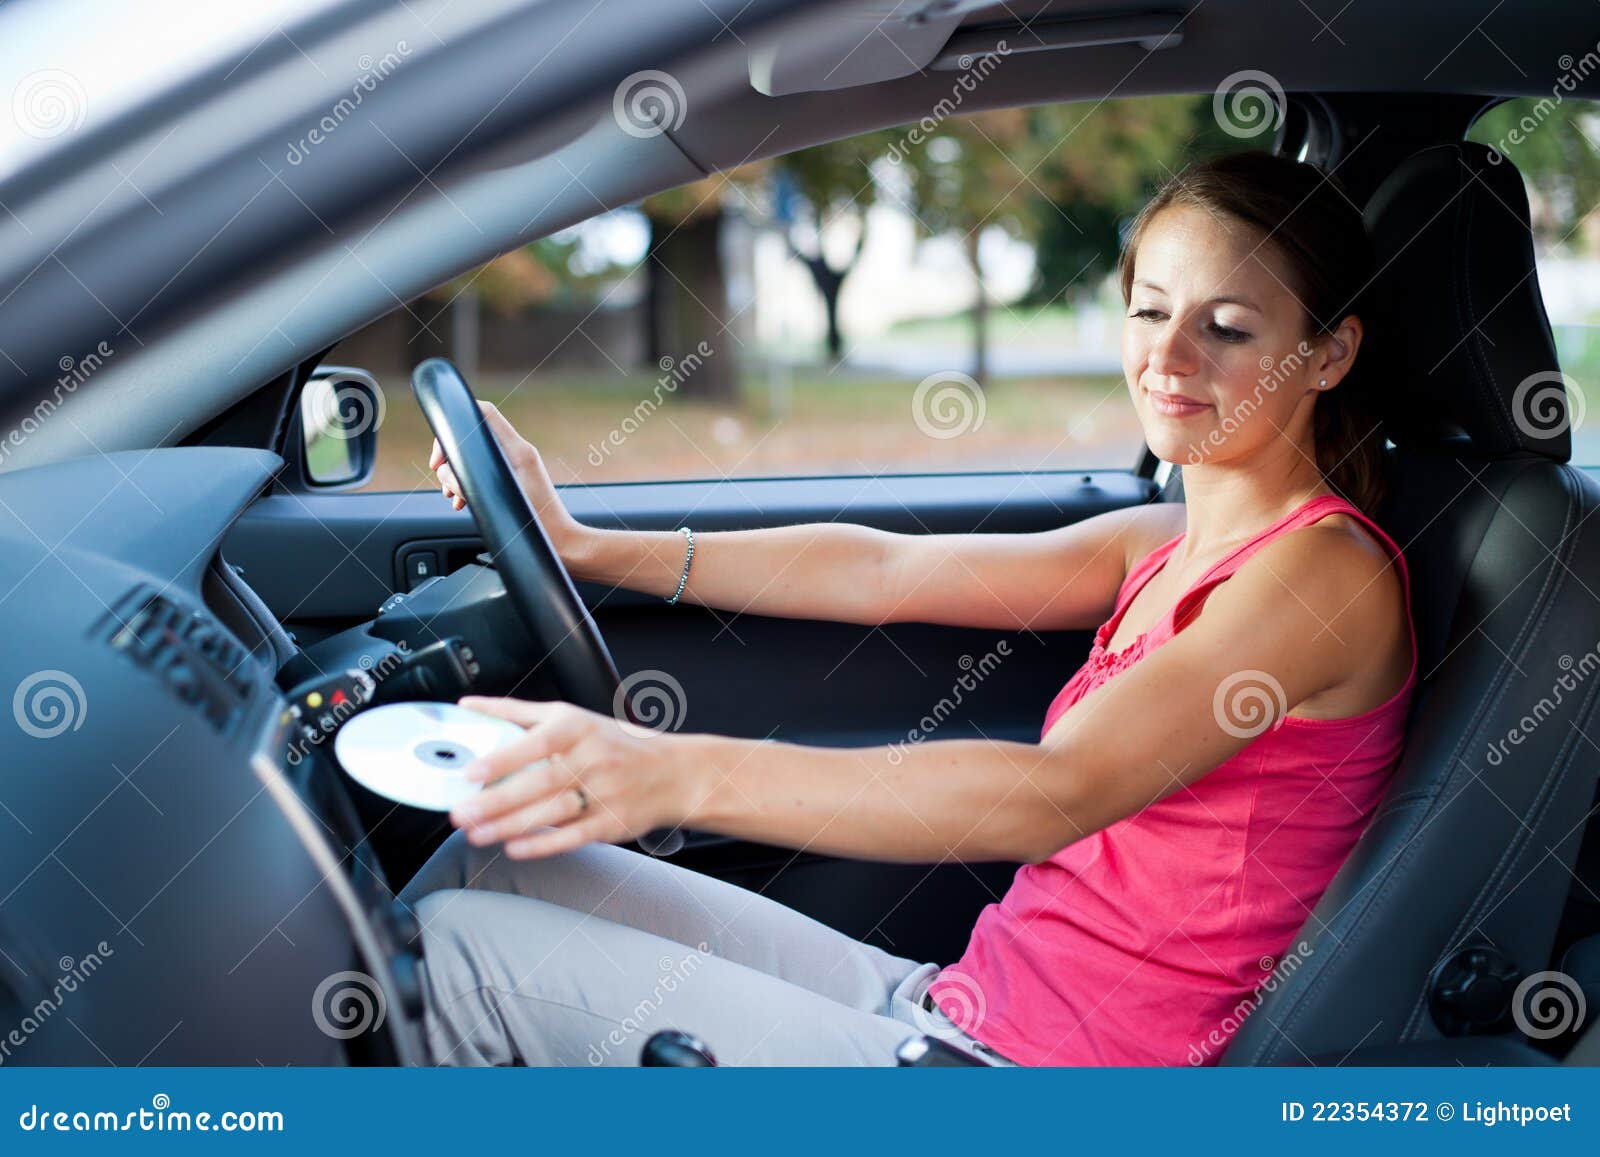 Female Driver Playing Music in the Car Stock Photo - Image of music ...